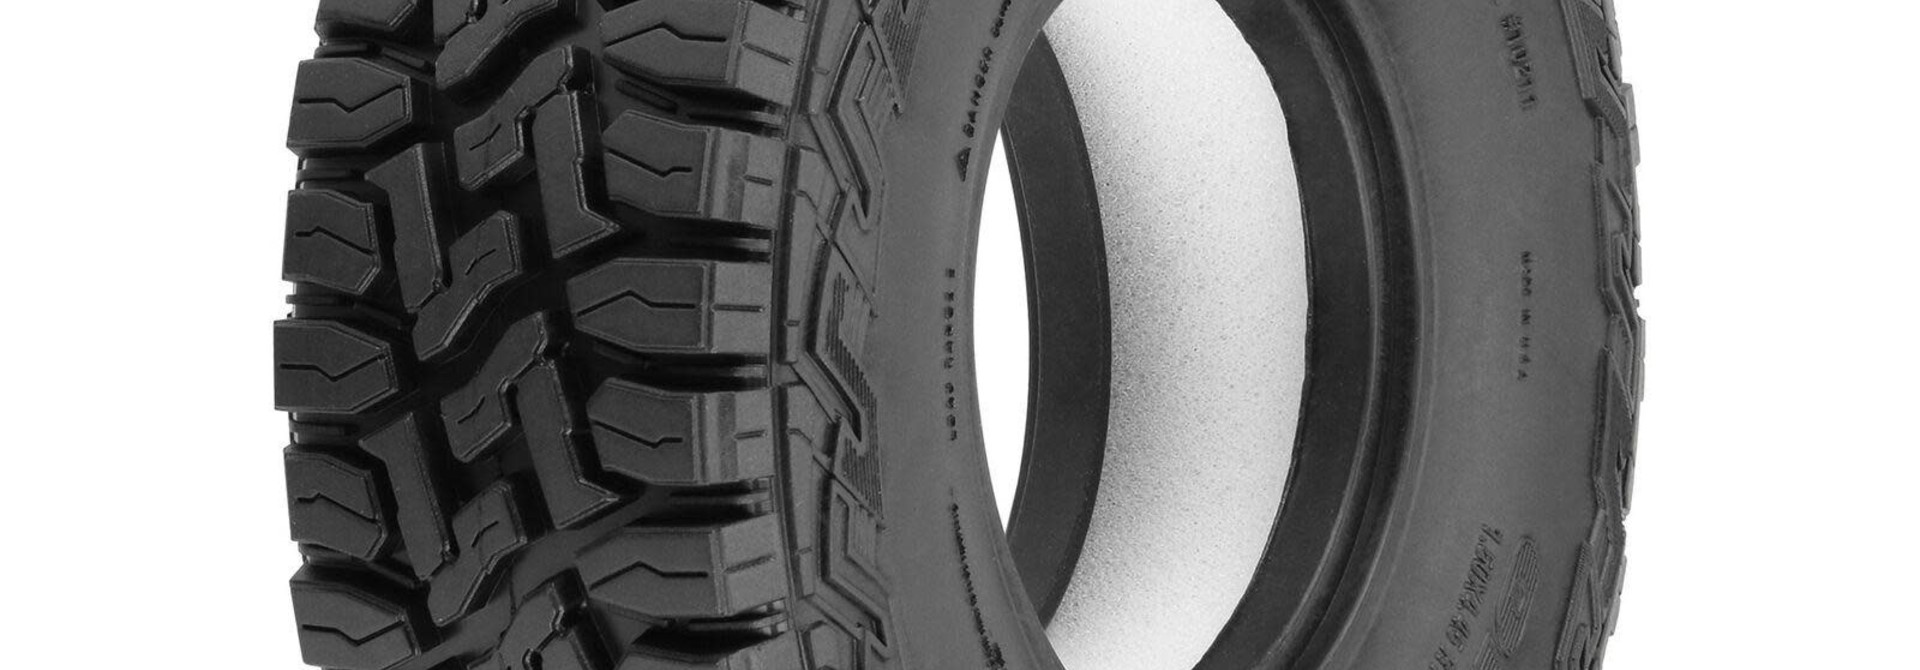 Proline 1/10 Toyo Open Country R/T G8 F/R 1.9" Rock Crawling Tires (2)